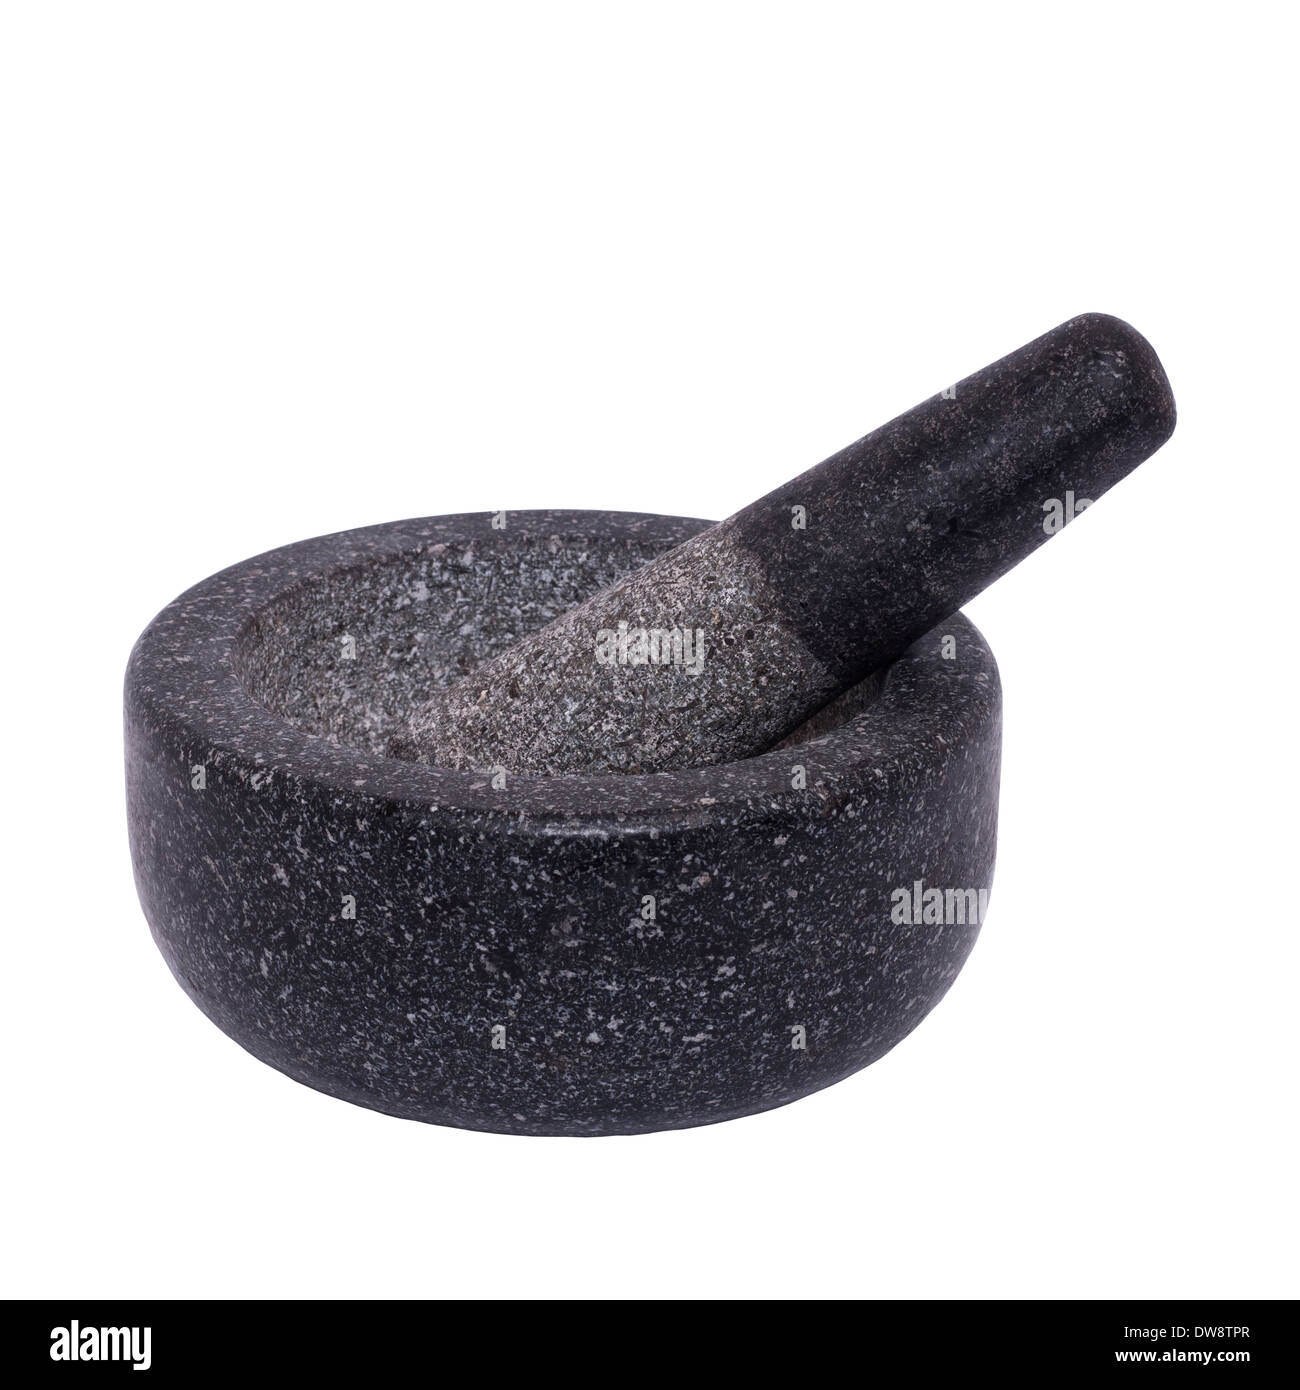 A pestle and mortar on a white background Stock Photo